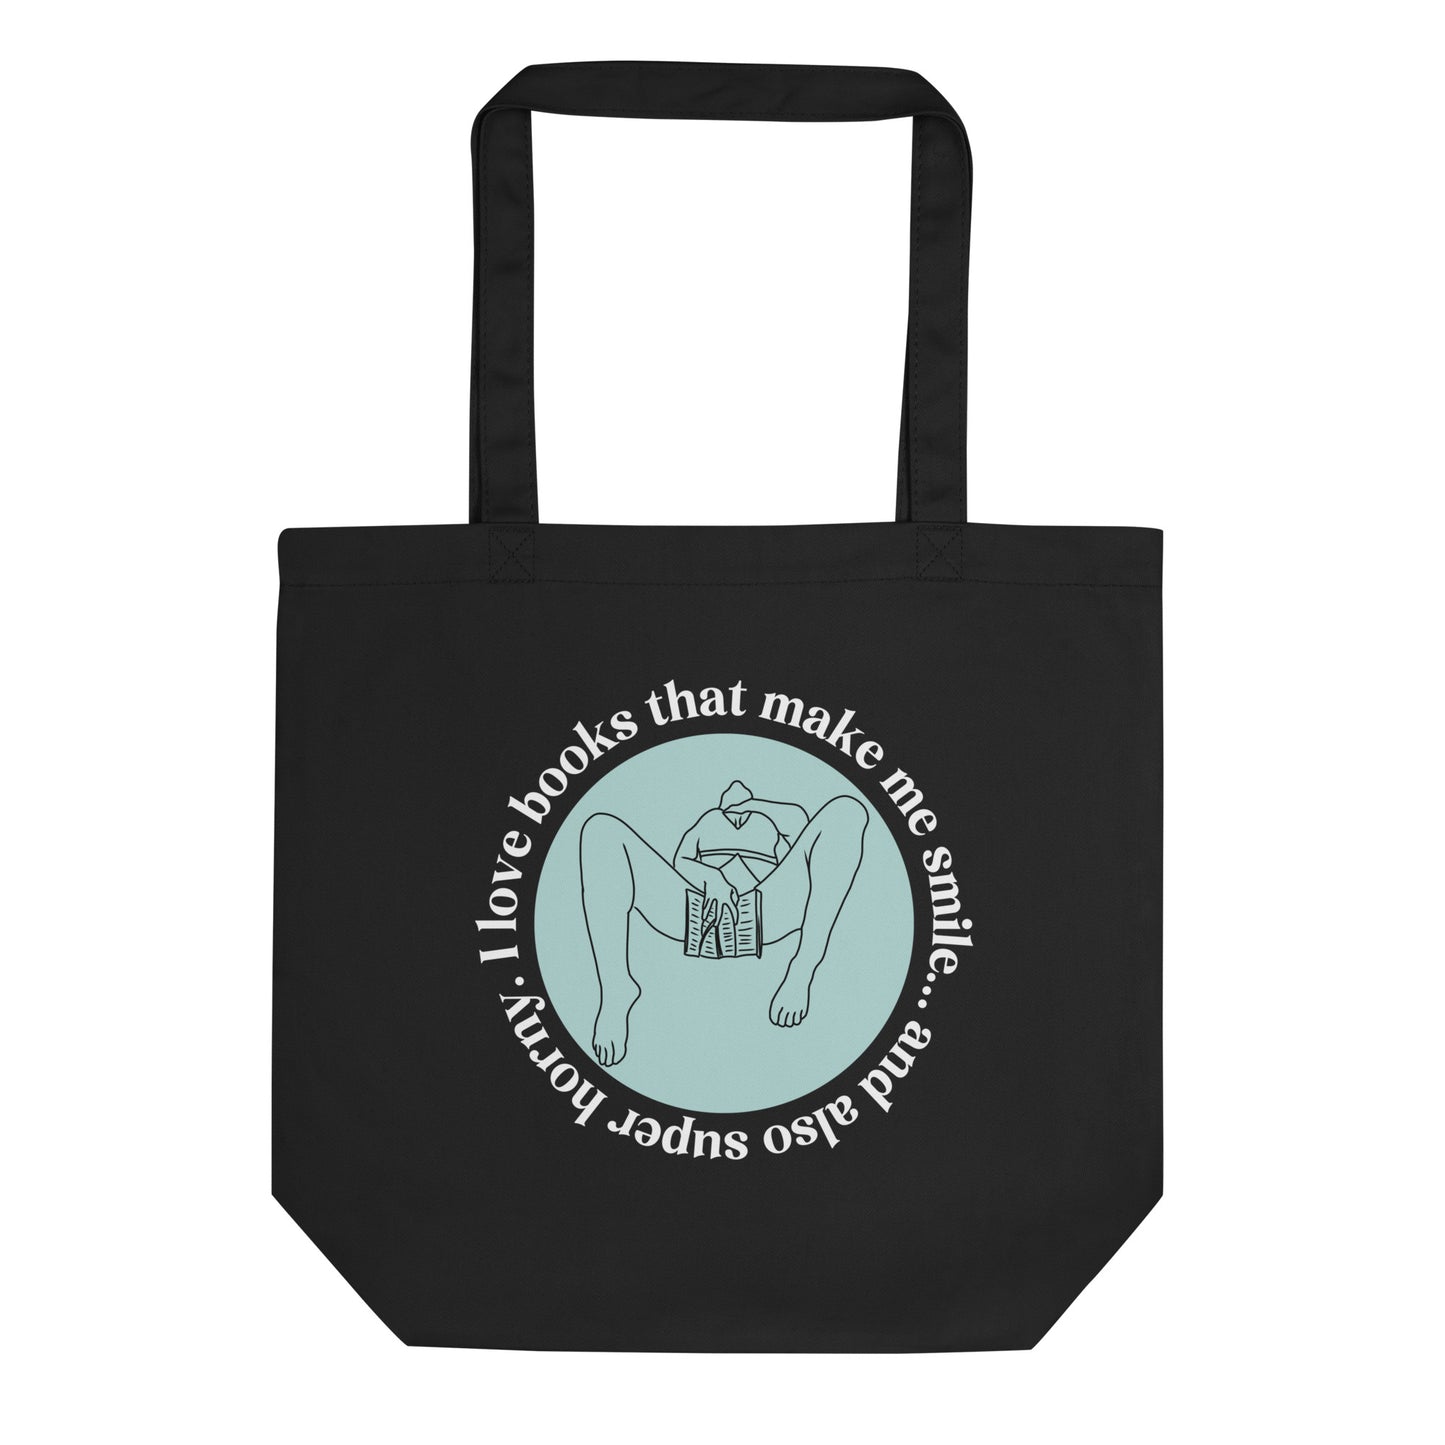 Bookish tote for a spicy book lover that reads I love books that make me smile… and also super horny